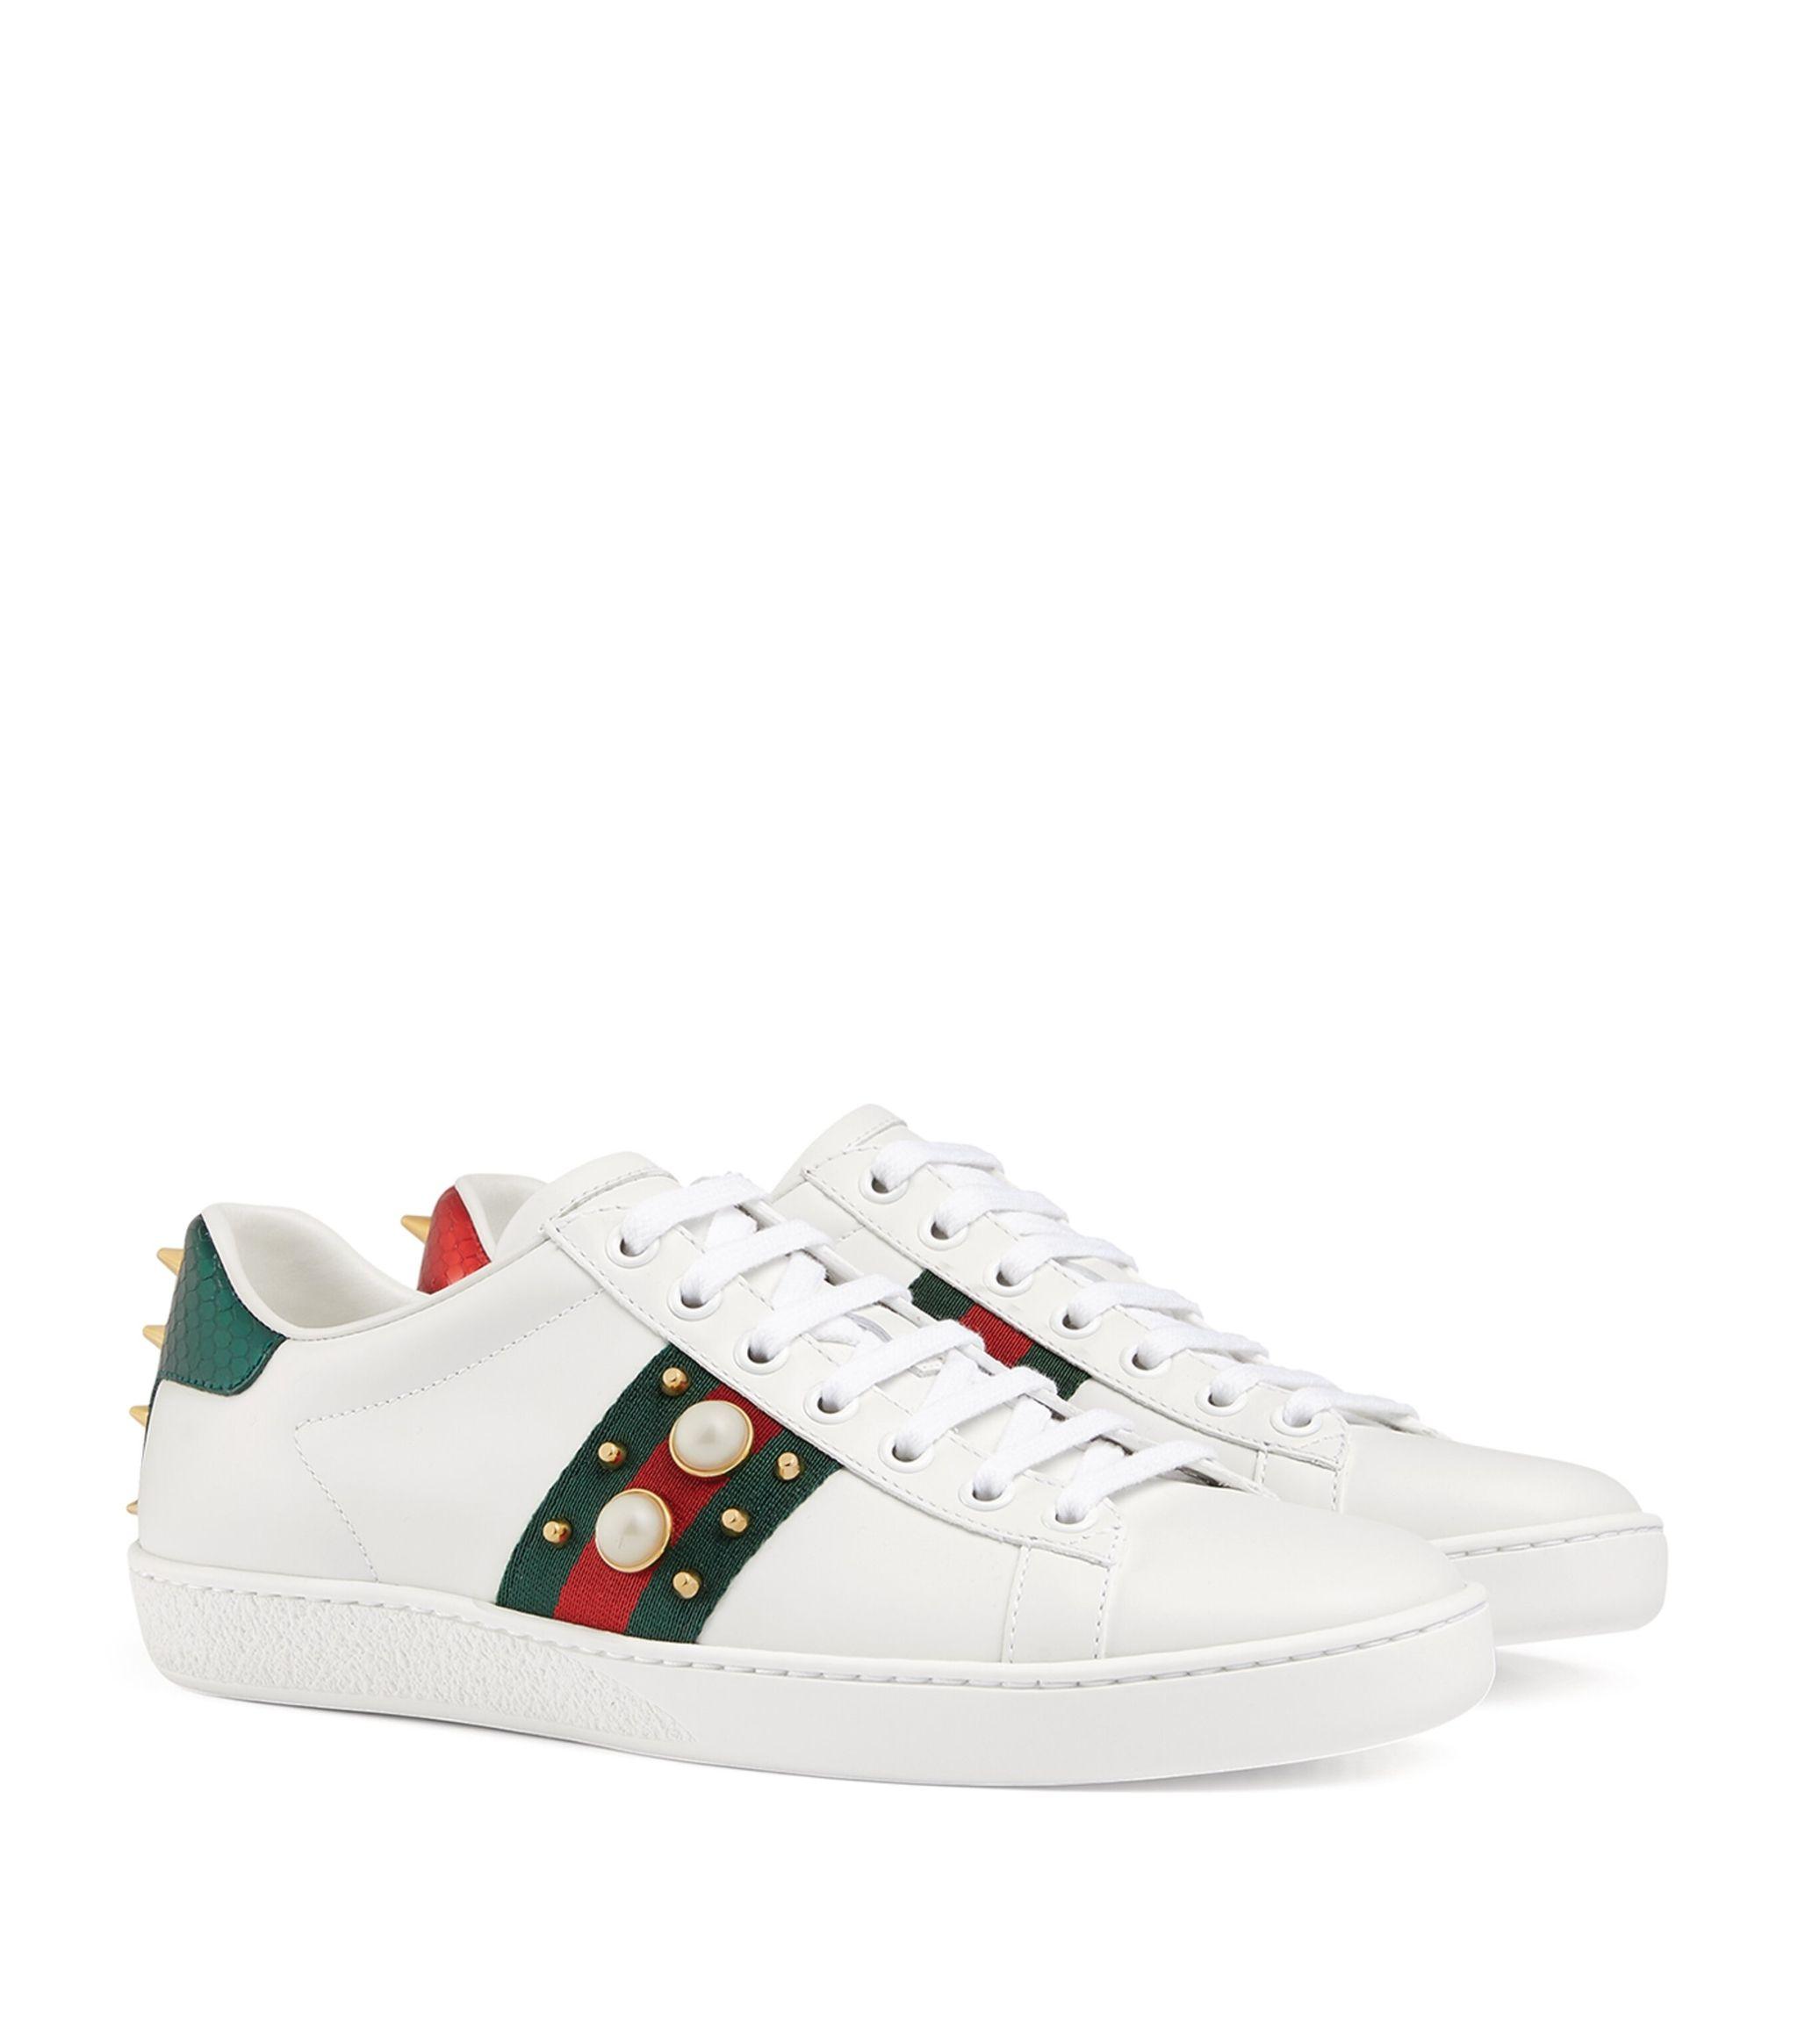 Gucci Ace Pearl And Stud-Detail Leather Trainers in White - Save 55% - Lyst